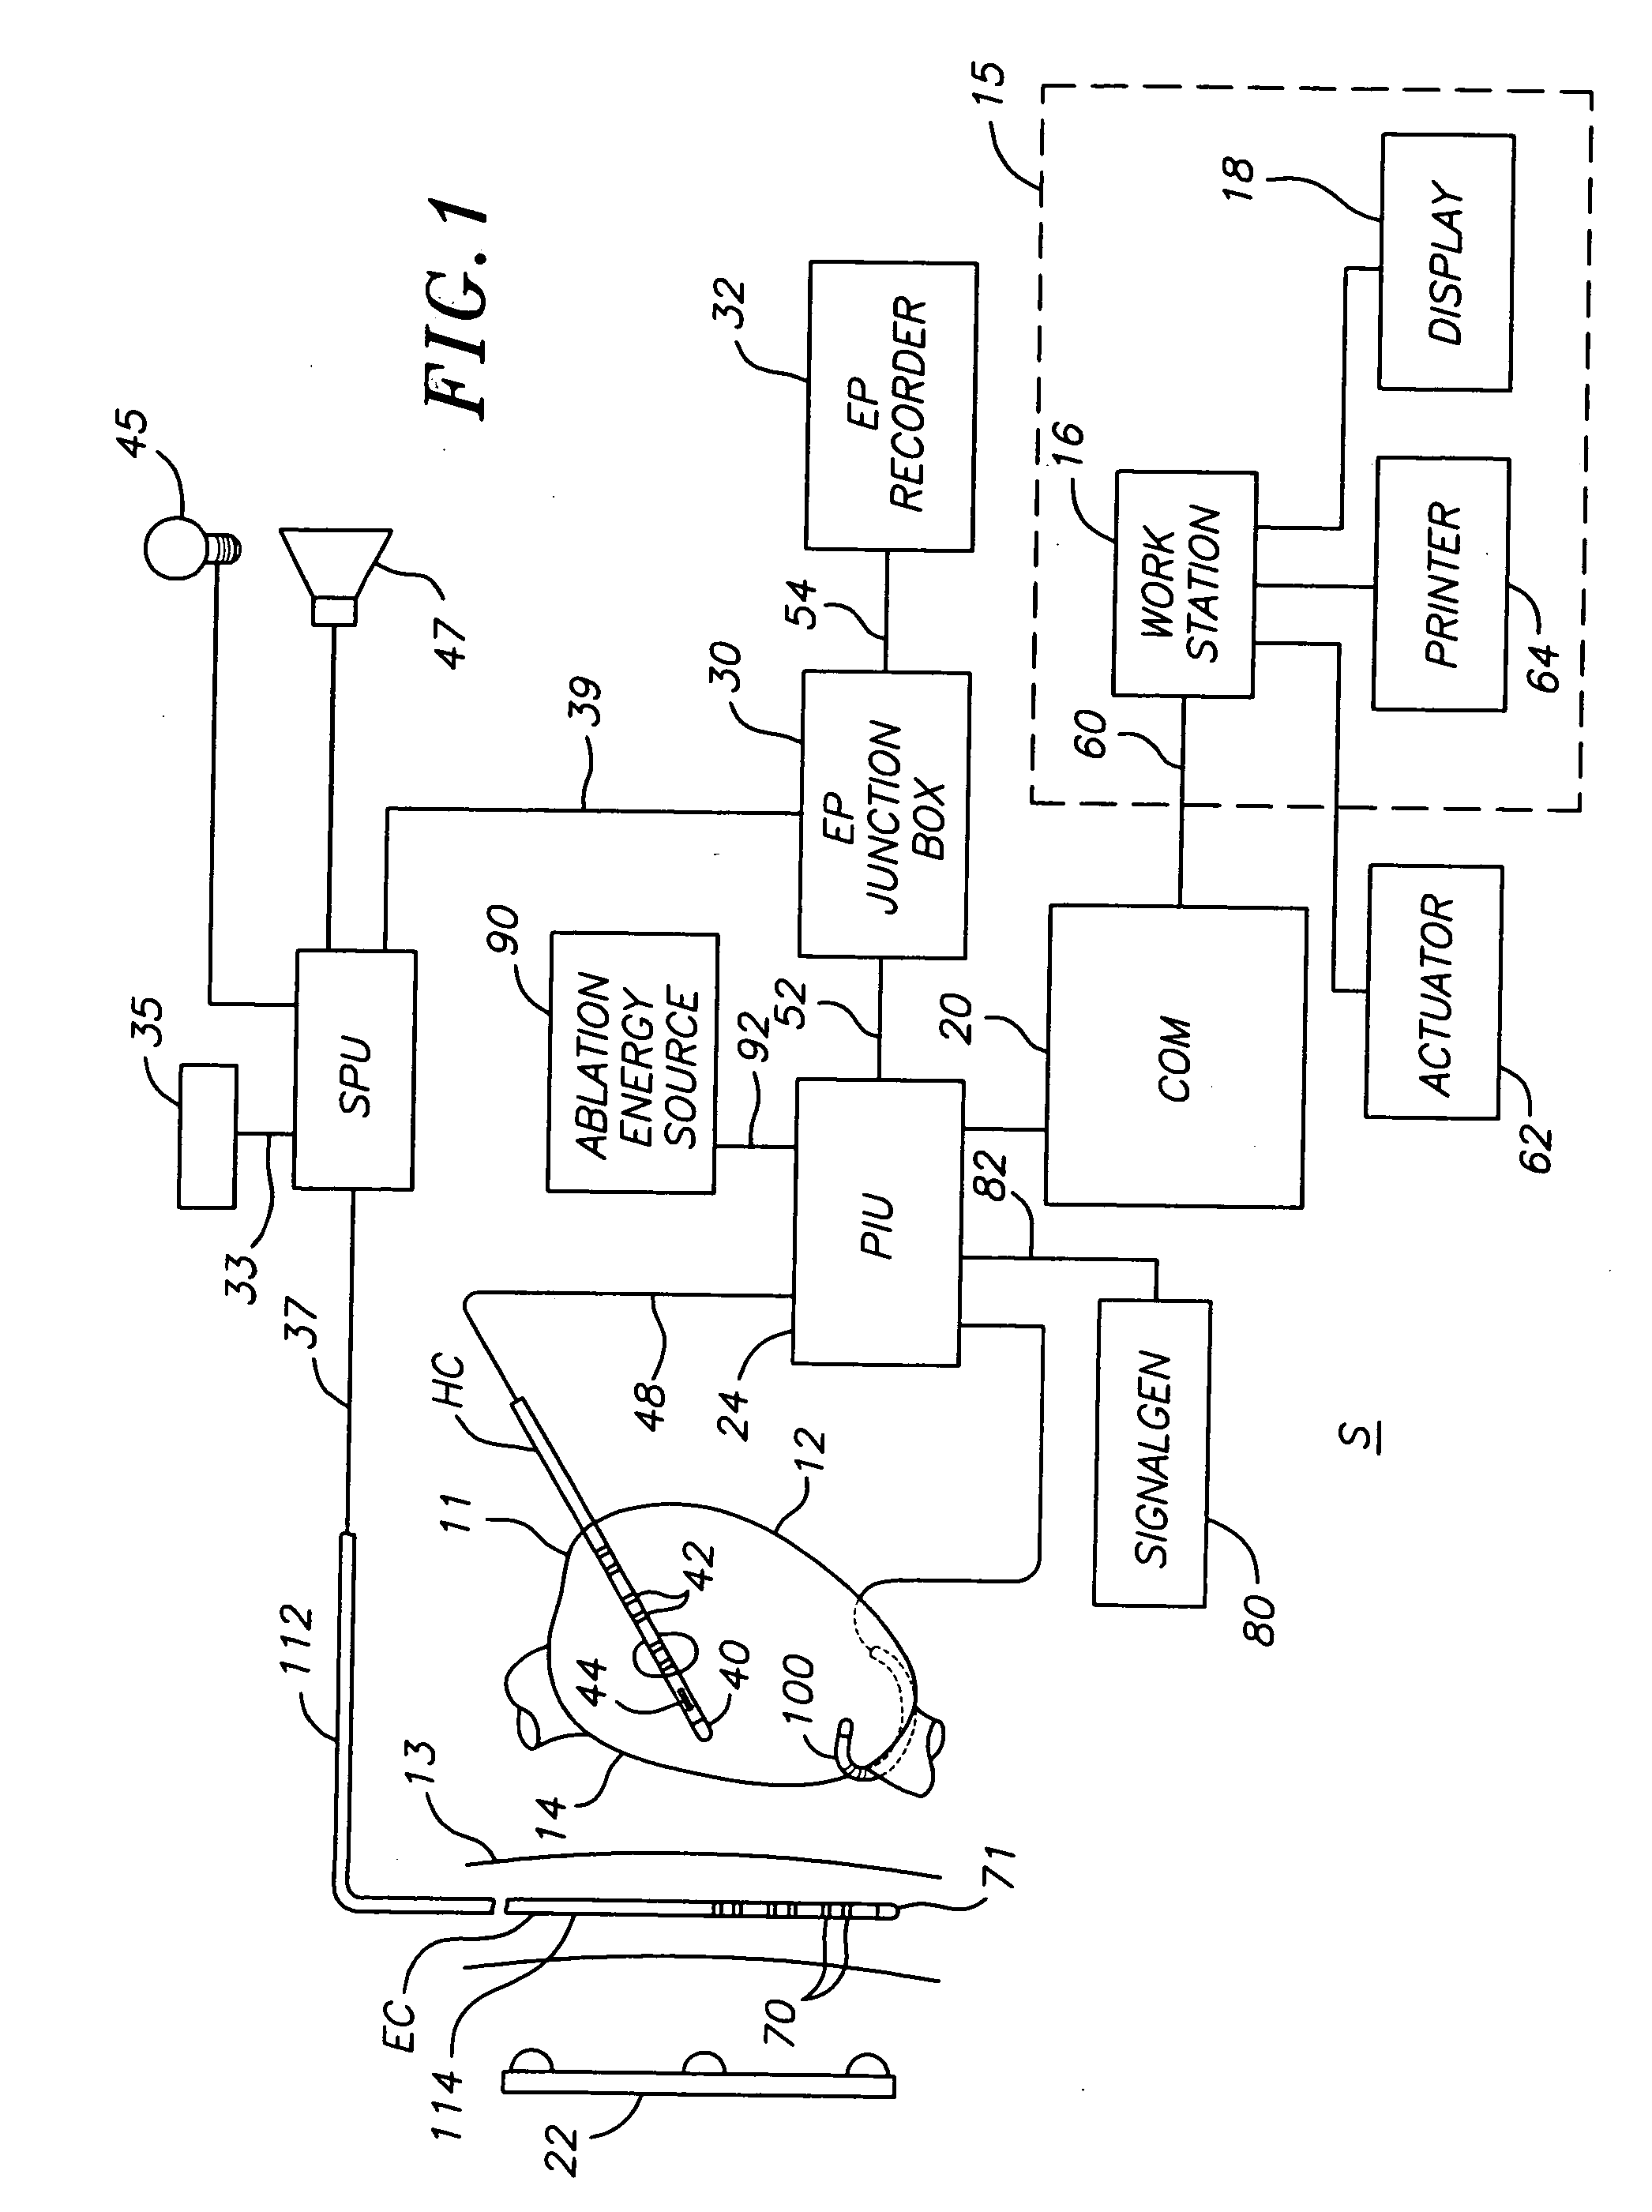 System and method for measuring esophagus proximity